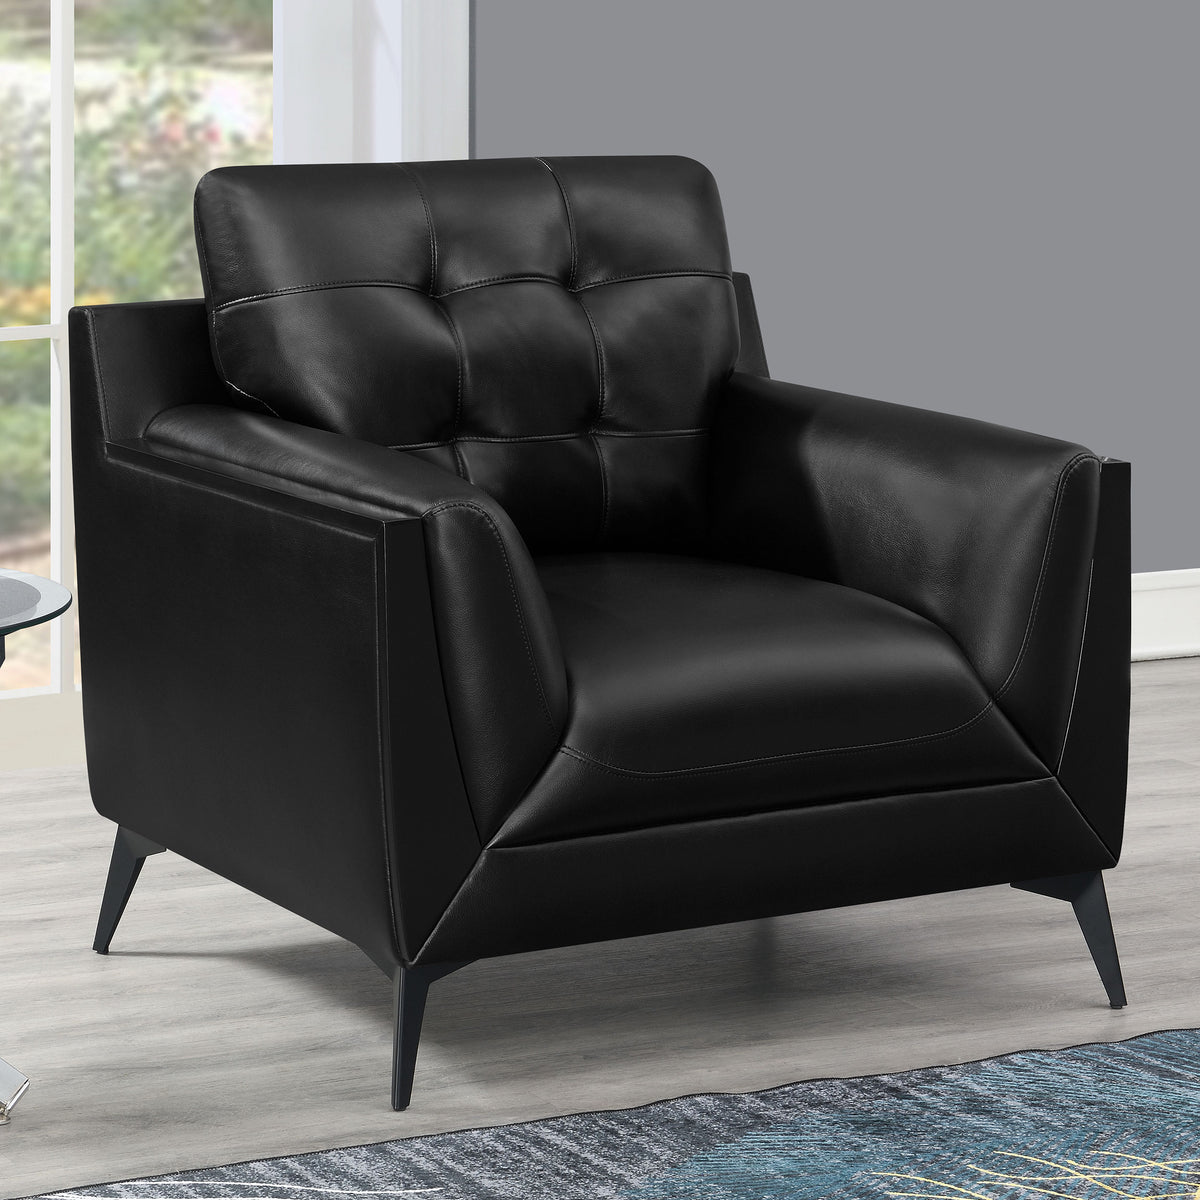 Moira Upholstered Tufted Chair with Track Arms Black  Las Vegas Furniture Stores